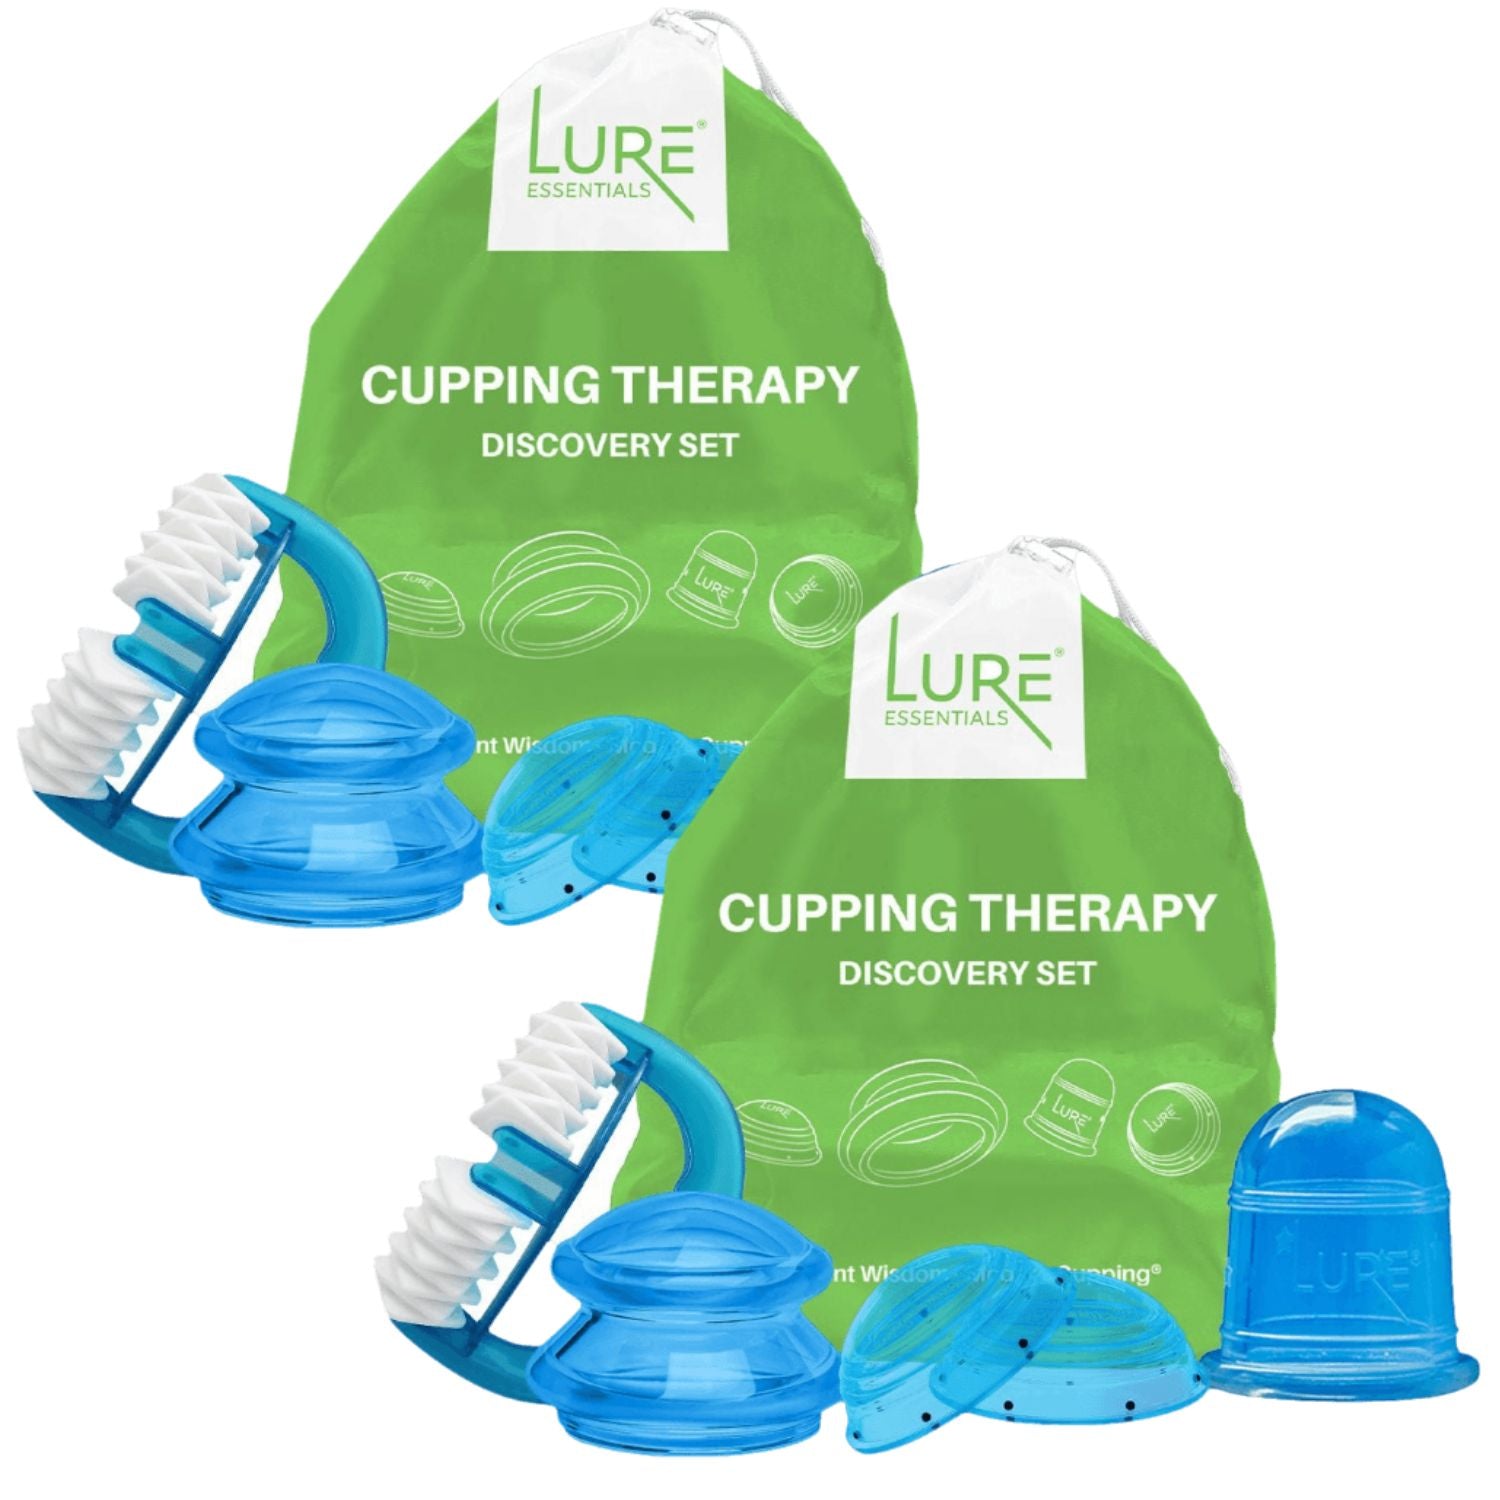 7 Things That Make Lure Essentials Cupping Cups the Best in the Histor